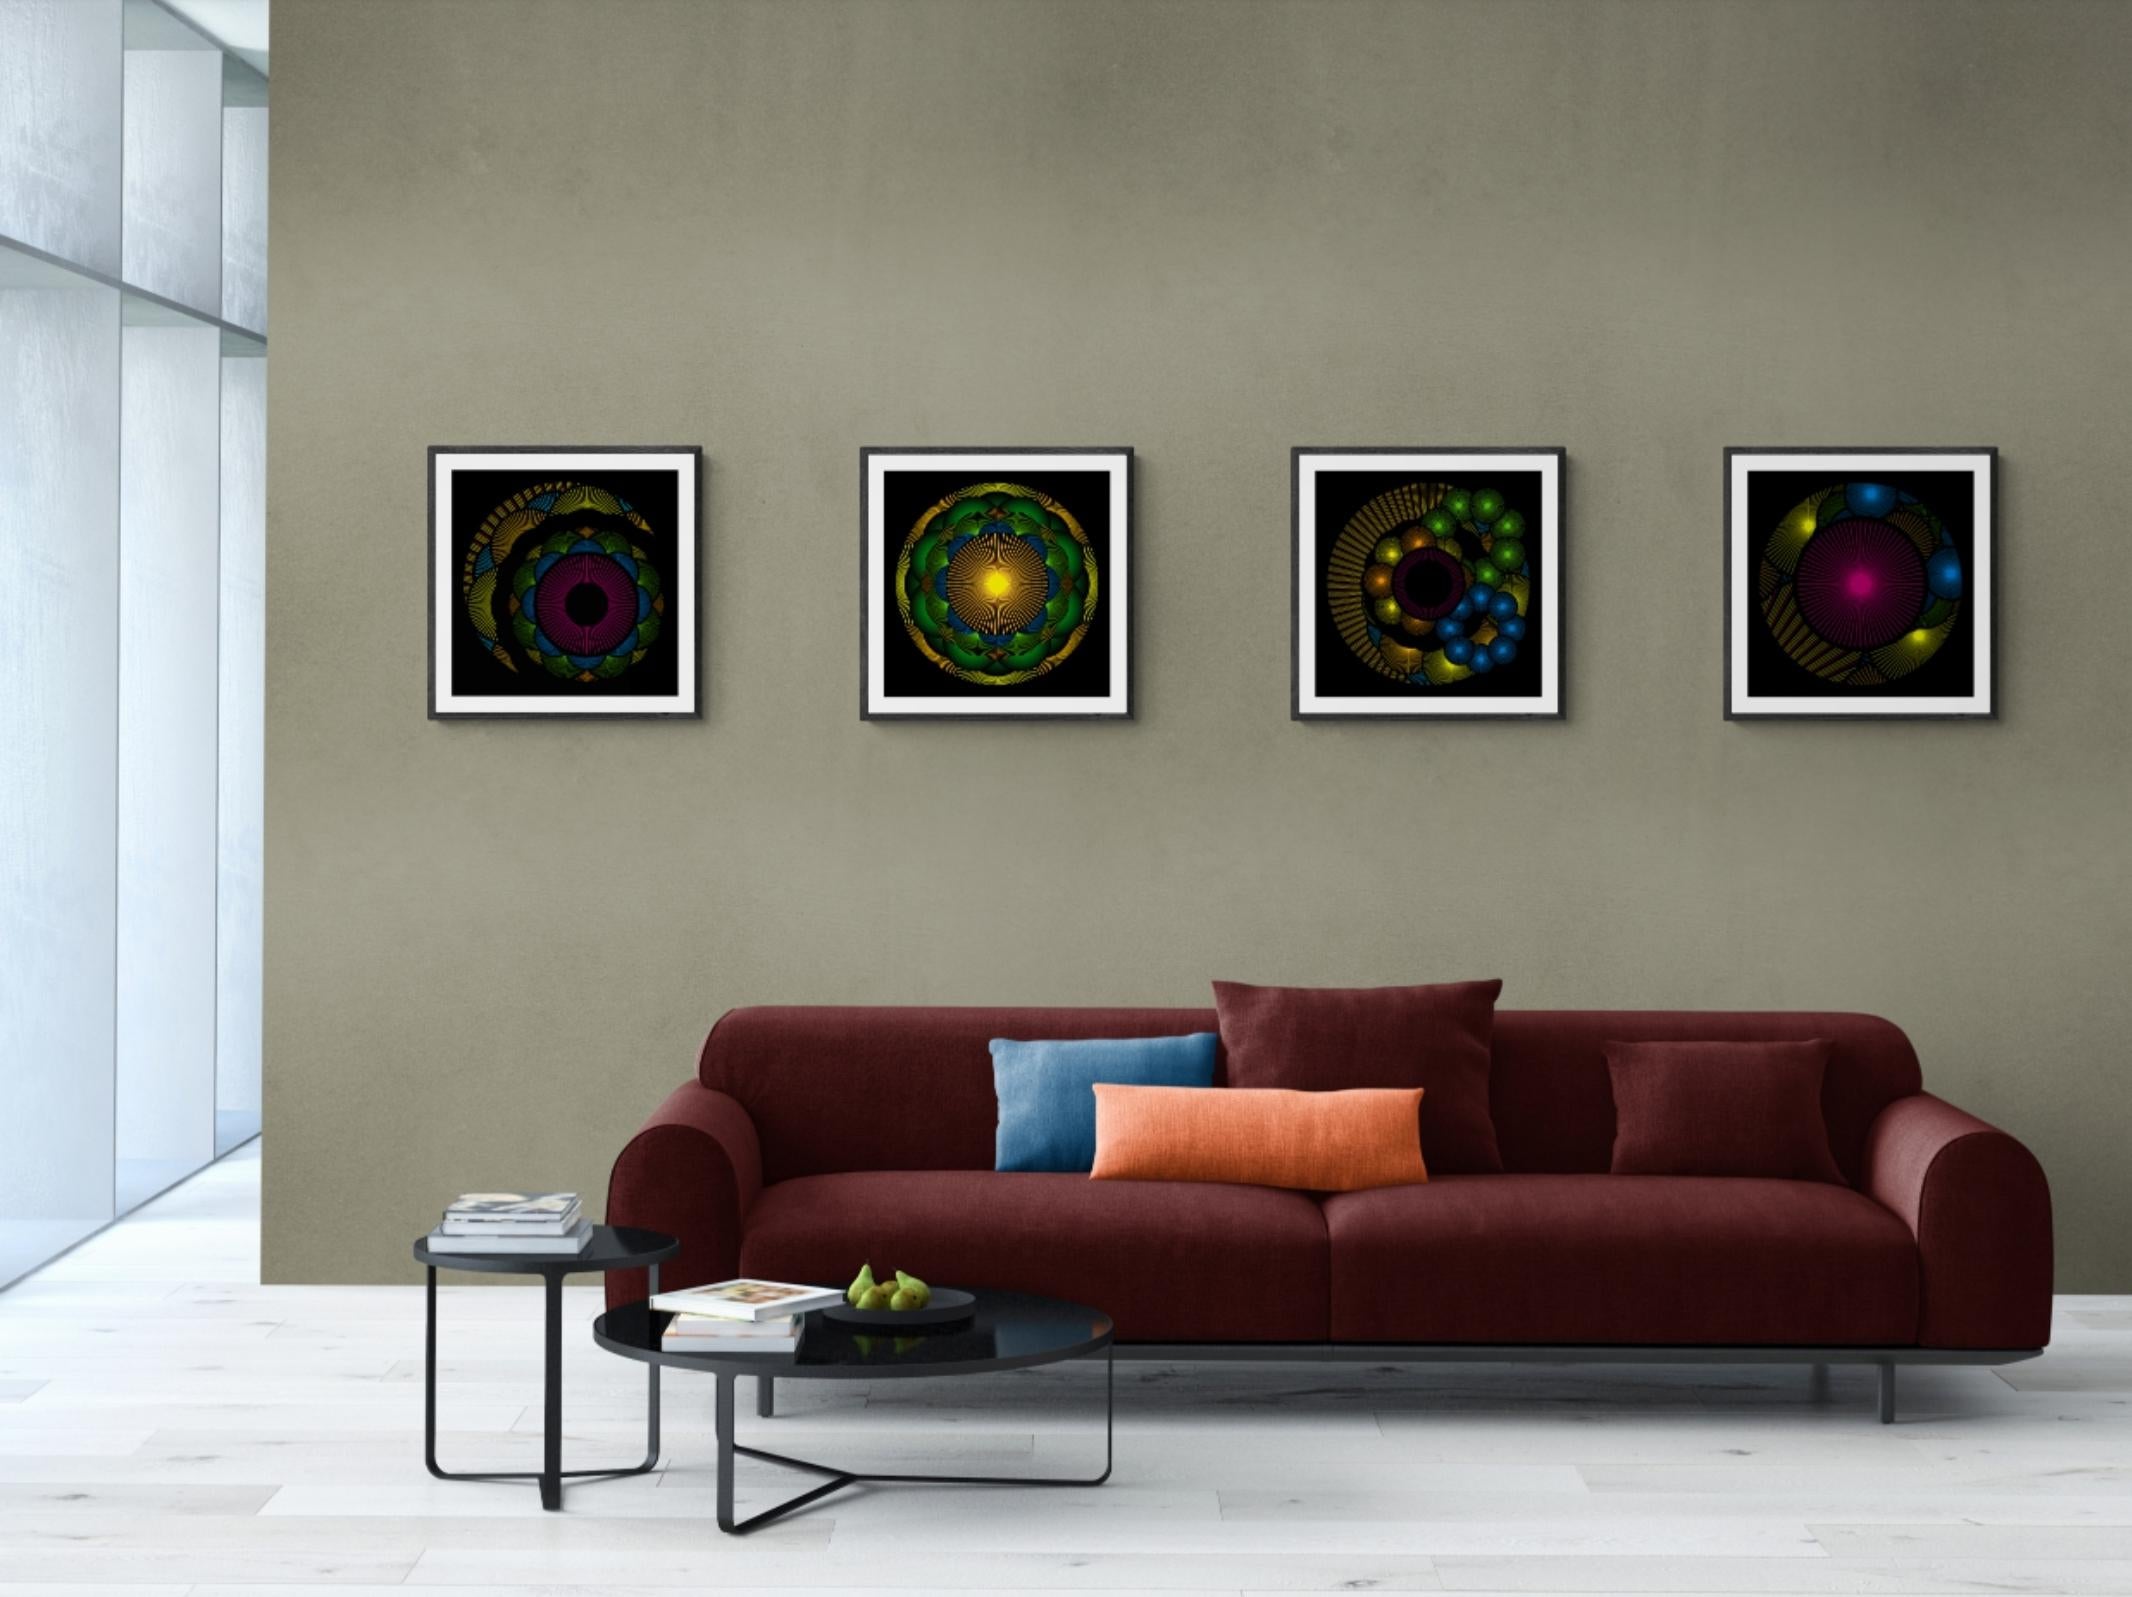 The Nebulosa collection of 35 colorful art works is a limited edition of 50 high quality fine art giclee prints. These digital illustrations are inspired by original fine art Thread Portals.
Each print comes with its signed and numbered Certificate